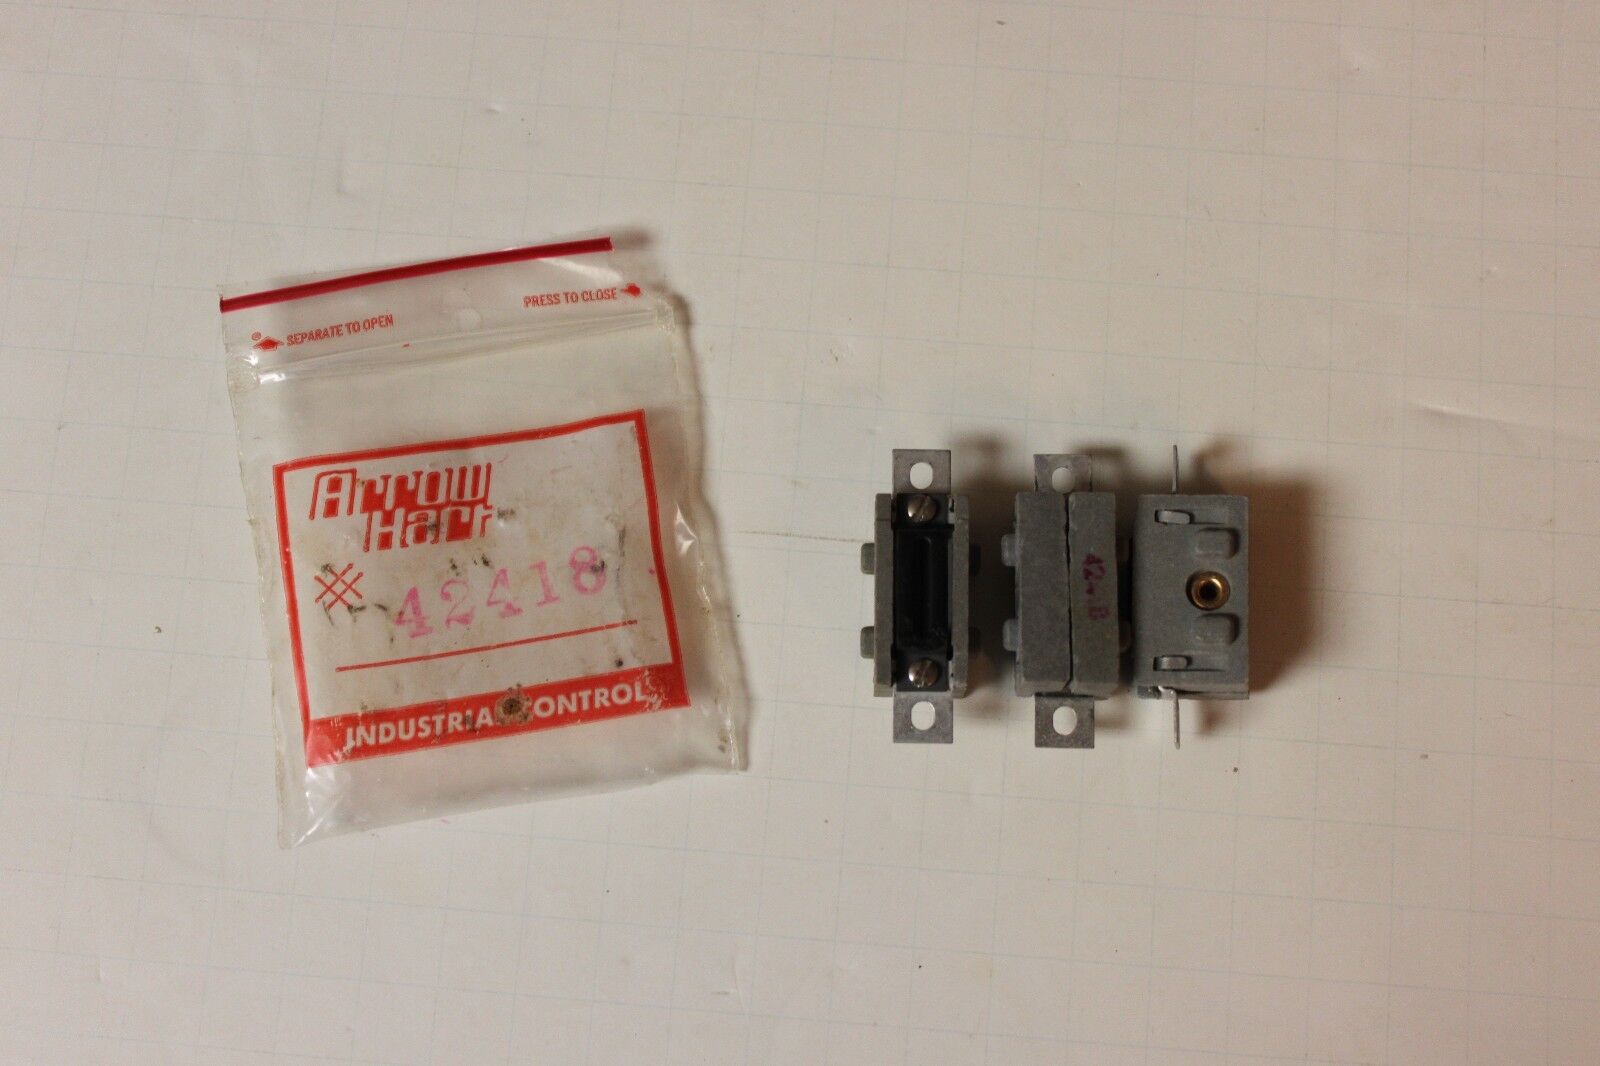 Arrow Hart 42418 Thermal Overload Heater Package of 3